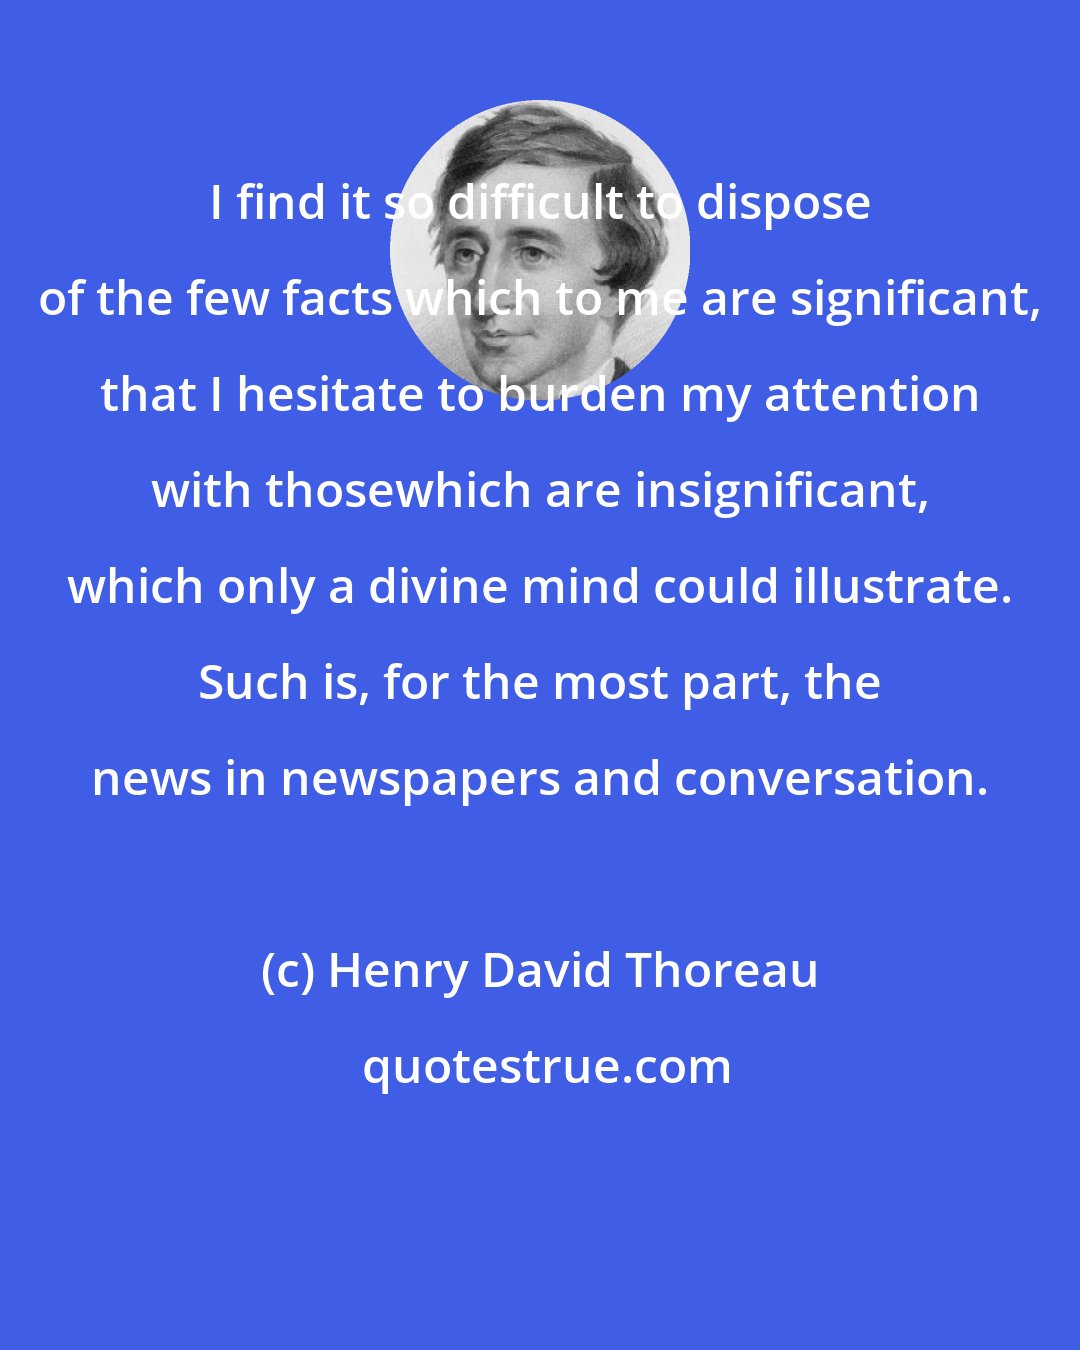 Henry David Thoreau: I find it so difficult to dispose of the few facts which to me are significant, that I hesitate to burden my attention with thosewhich are insignificant, which only a divine mind could illustrate. Such is, for the most part, the news in newspapers and conversation.